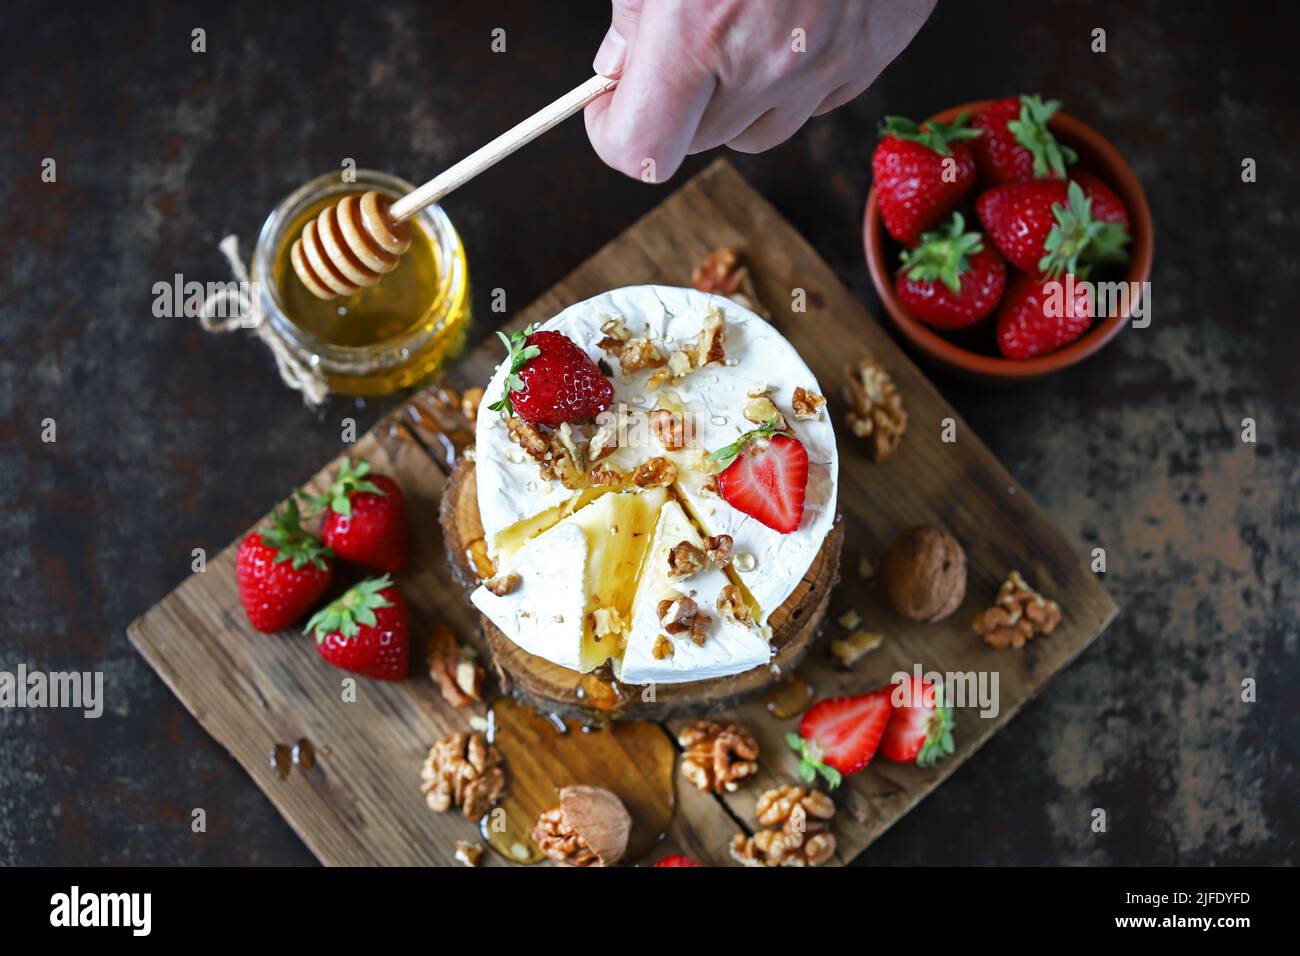 Camembert cheese with nuts, honey and strawberries. Stock Photo